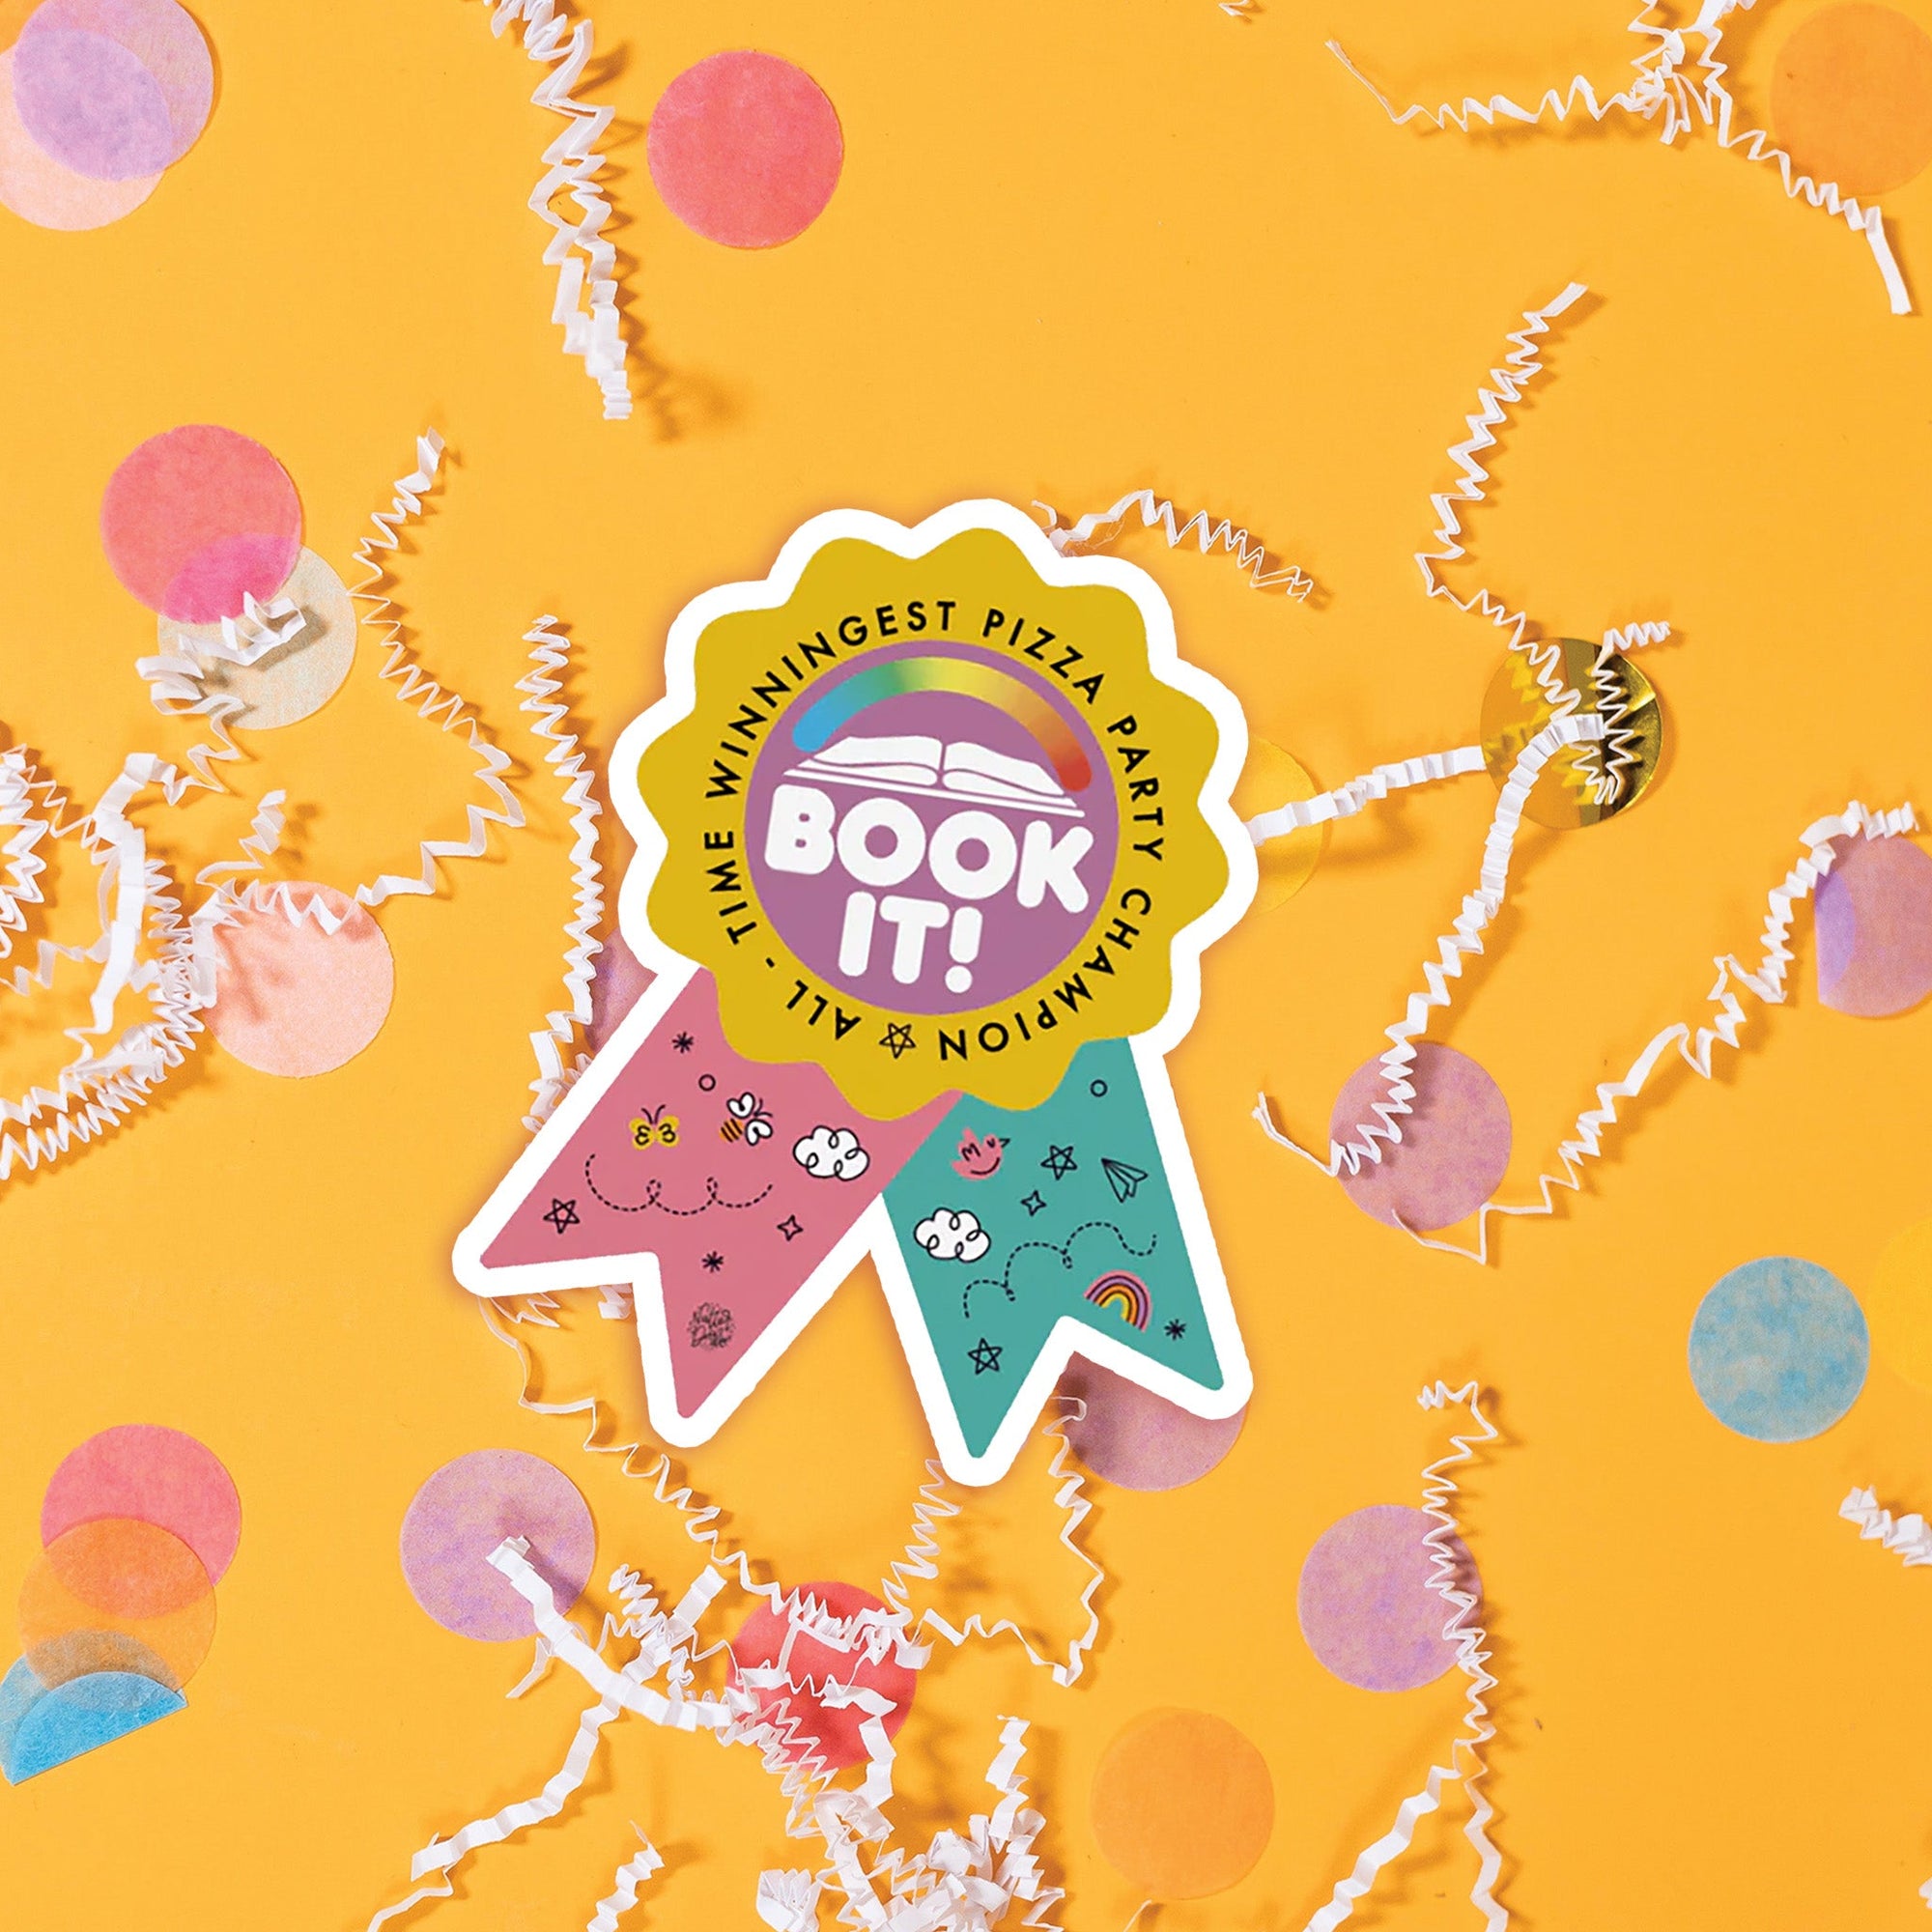 On a sunny mustard background sits a sticker with white crinkle and big, colorful confetti scattered around. This colorful ribbon sticker has an illustration of an open book and a rainbow meter above it. It says "BOOK IT!" in a white, bubble text. There are handdrawn doodles on the pink and turquoise ribbons. 'ALL-TIME WINNINGEST PIZZA PARTY CHAMPION'.